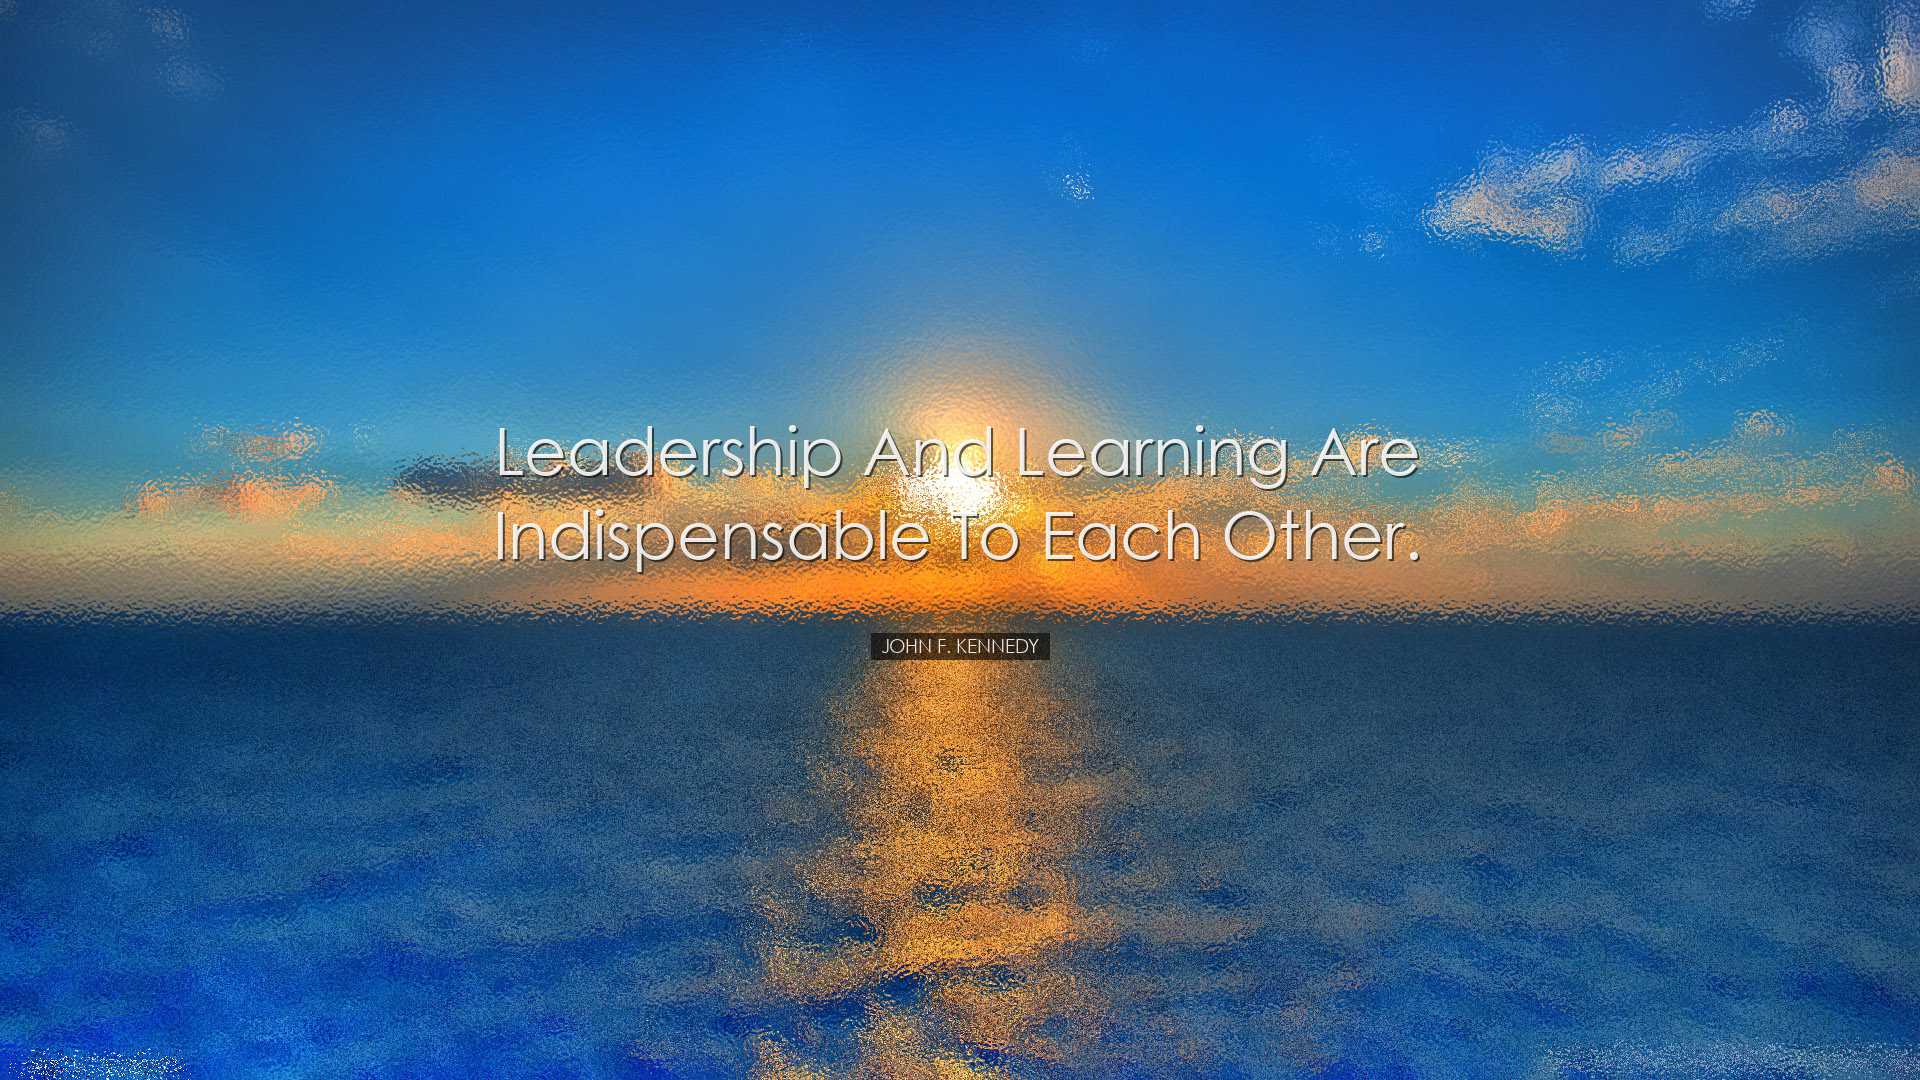 Leadership and learning are indispensable to each other. - John F.